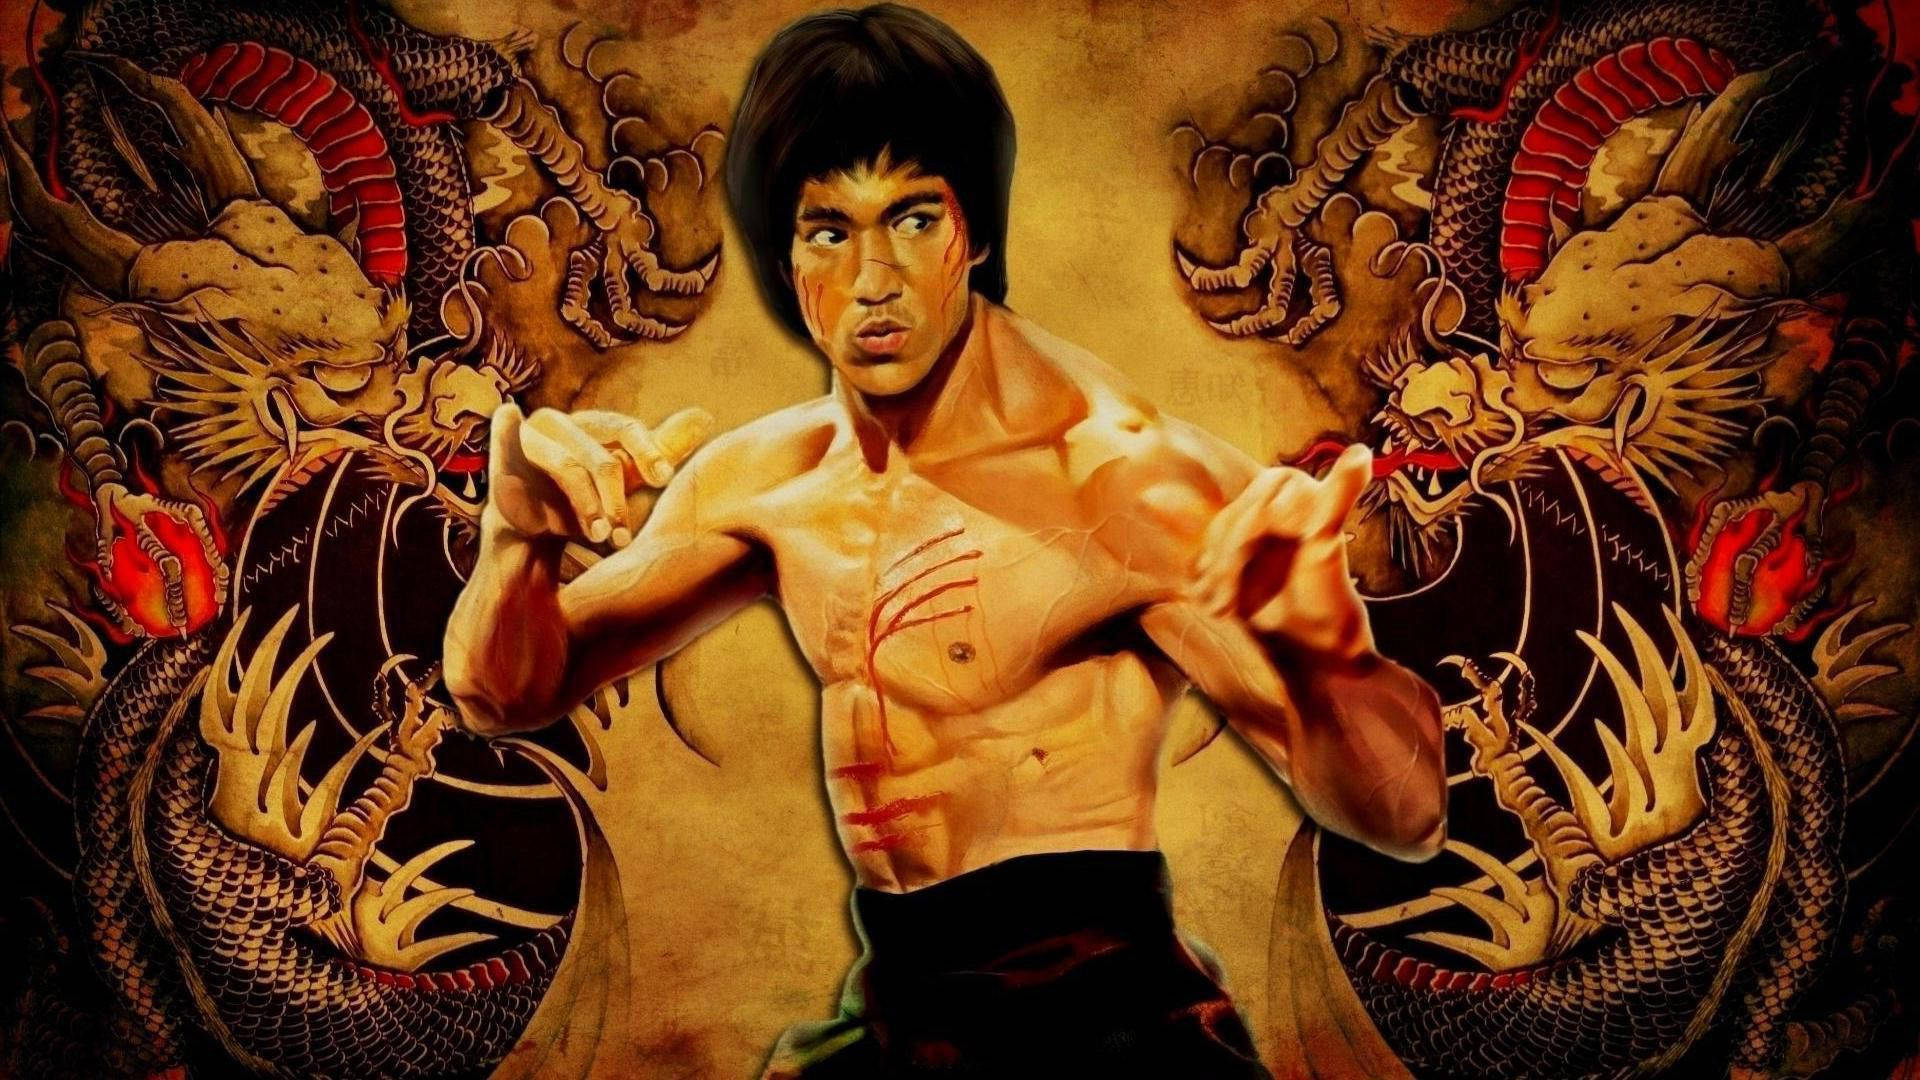 "A tribute to the ultimate martial arts master - Bruce Lee" Wallpaper